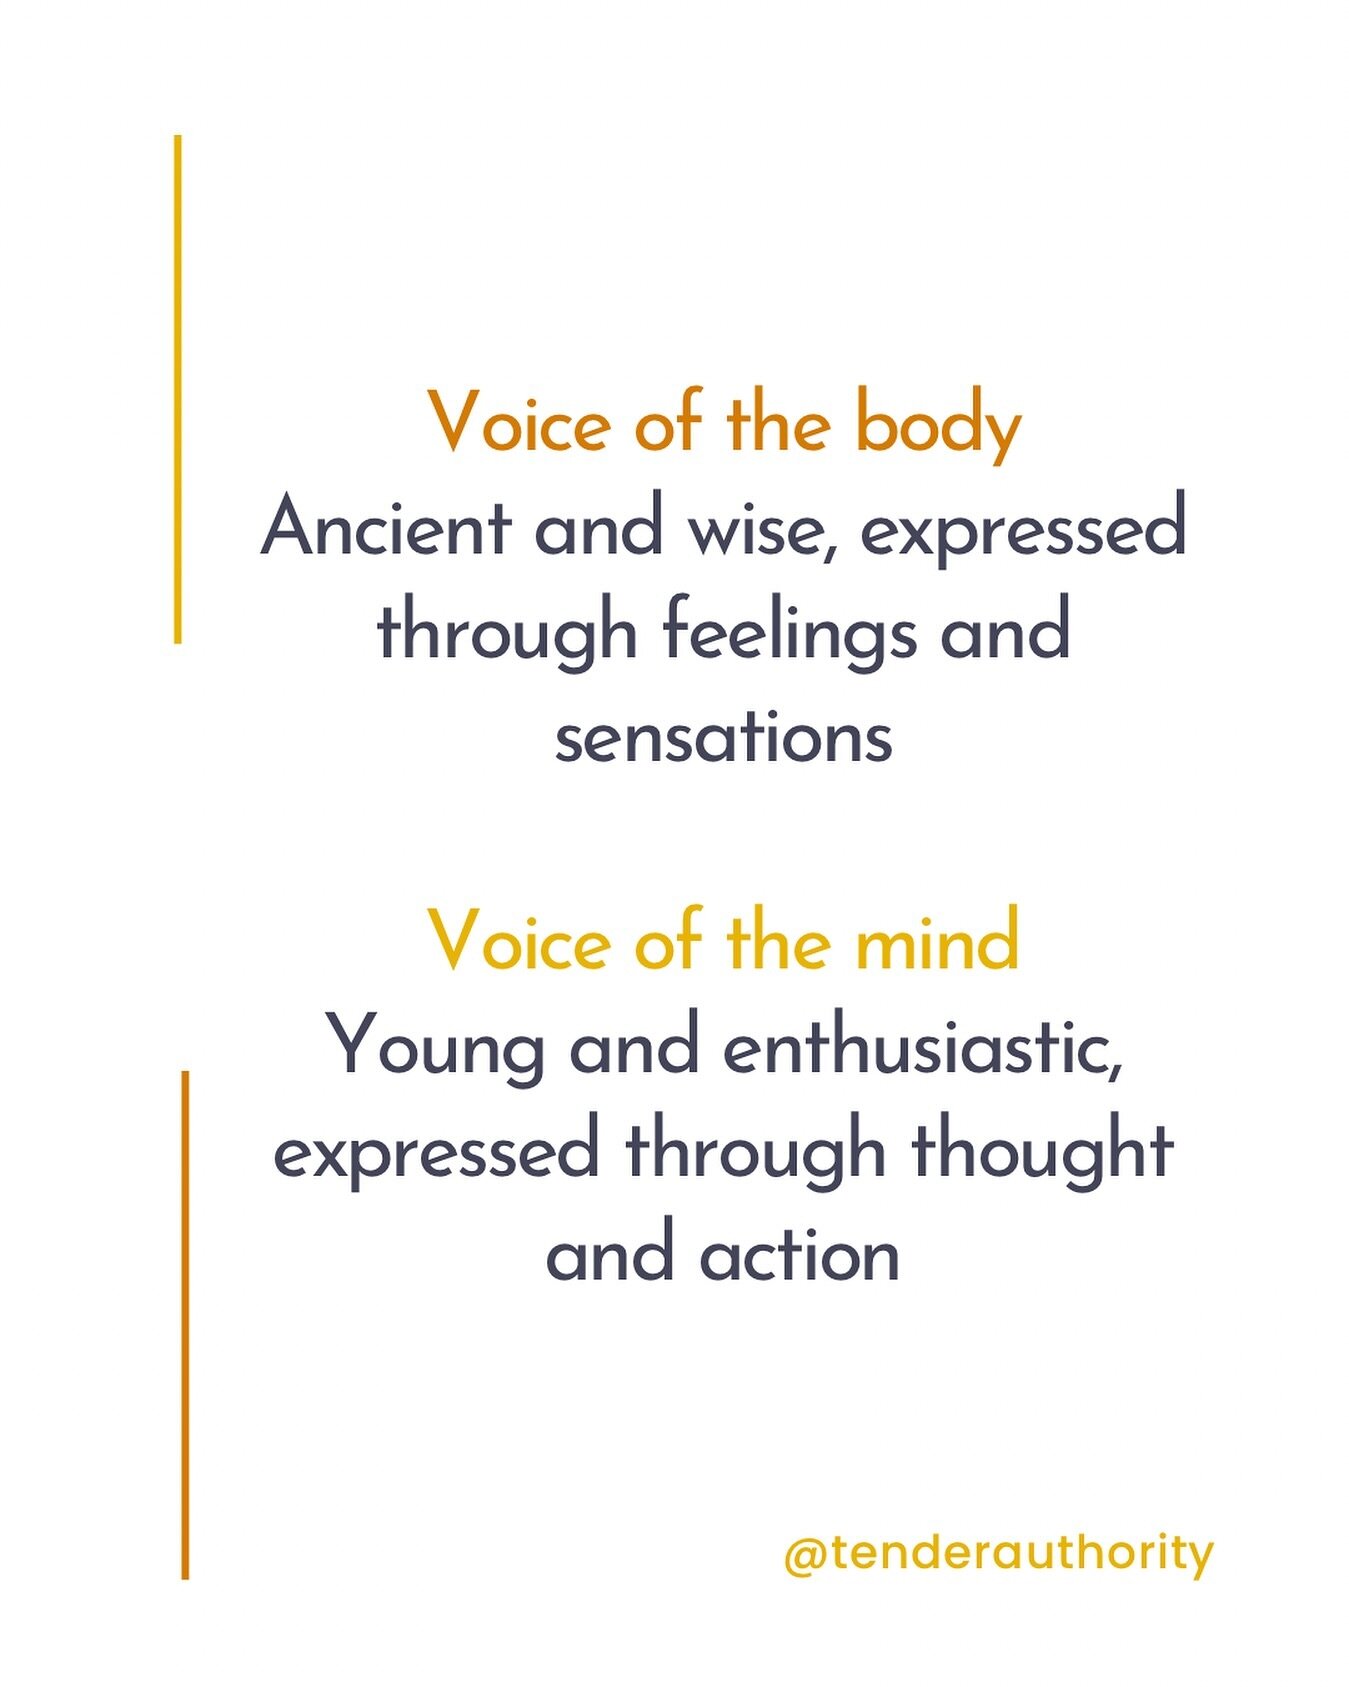 How would you answer these questions? 👇🏽

🌞 Can one voice exist without the other, within you?

🌞 Which voice do you often struggle to hear clearly?

🌞 Is there one voice that you give more importance than the other?

🌞 If you had a choice, whi